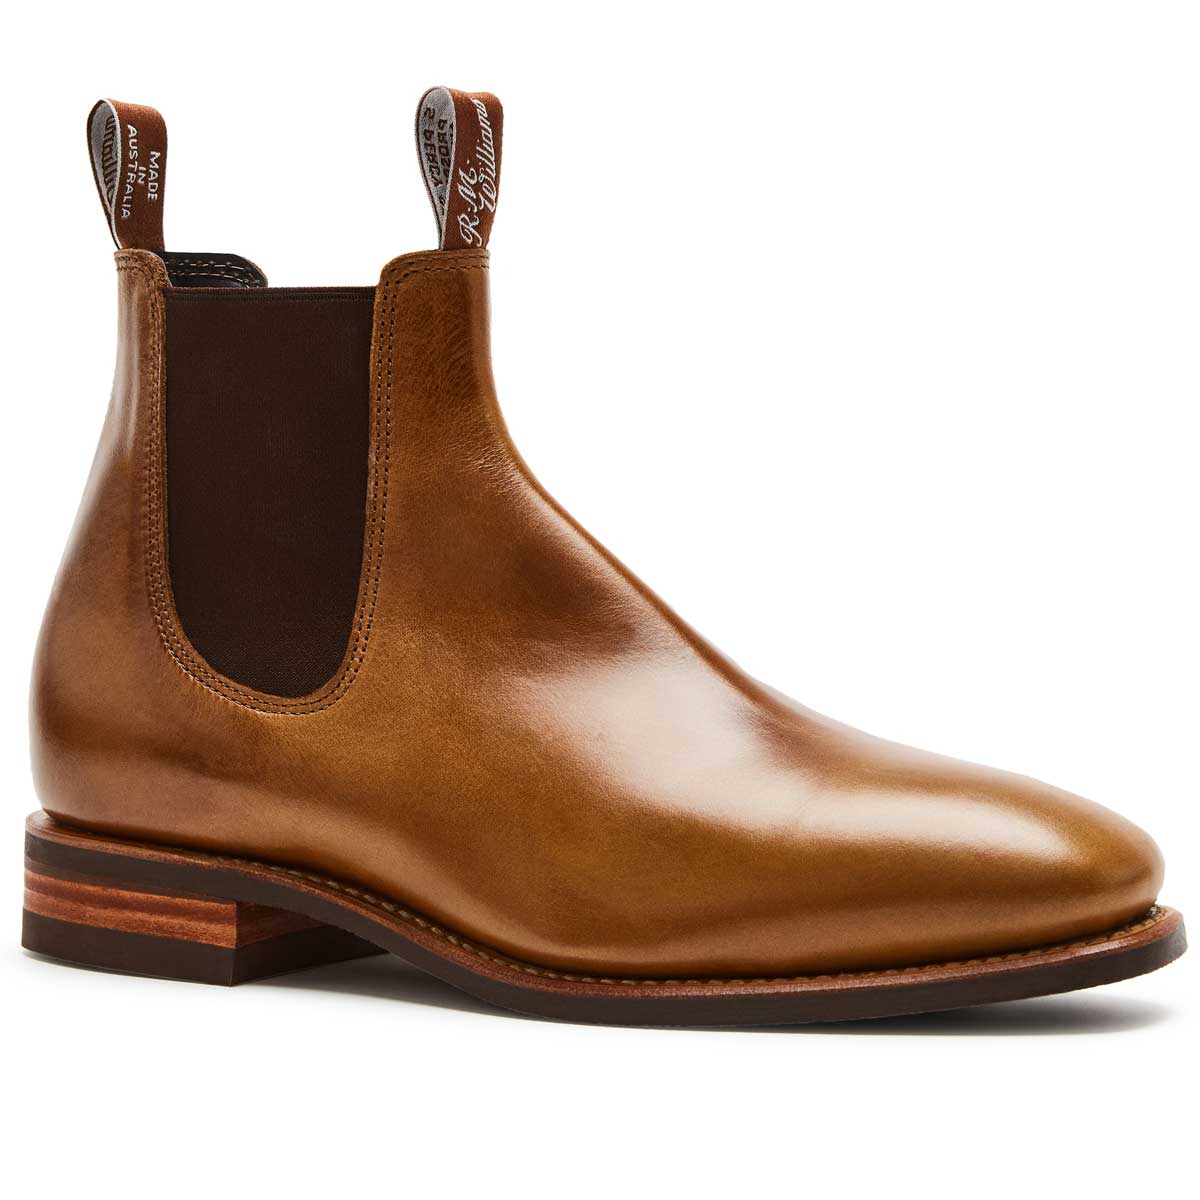 RM WILLIAMS Comfort Craftsman Boots *Limited Edition* Men's - Caramel